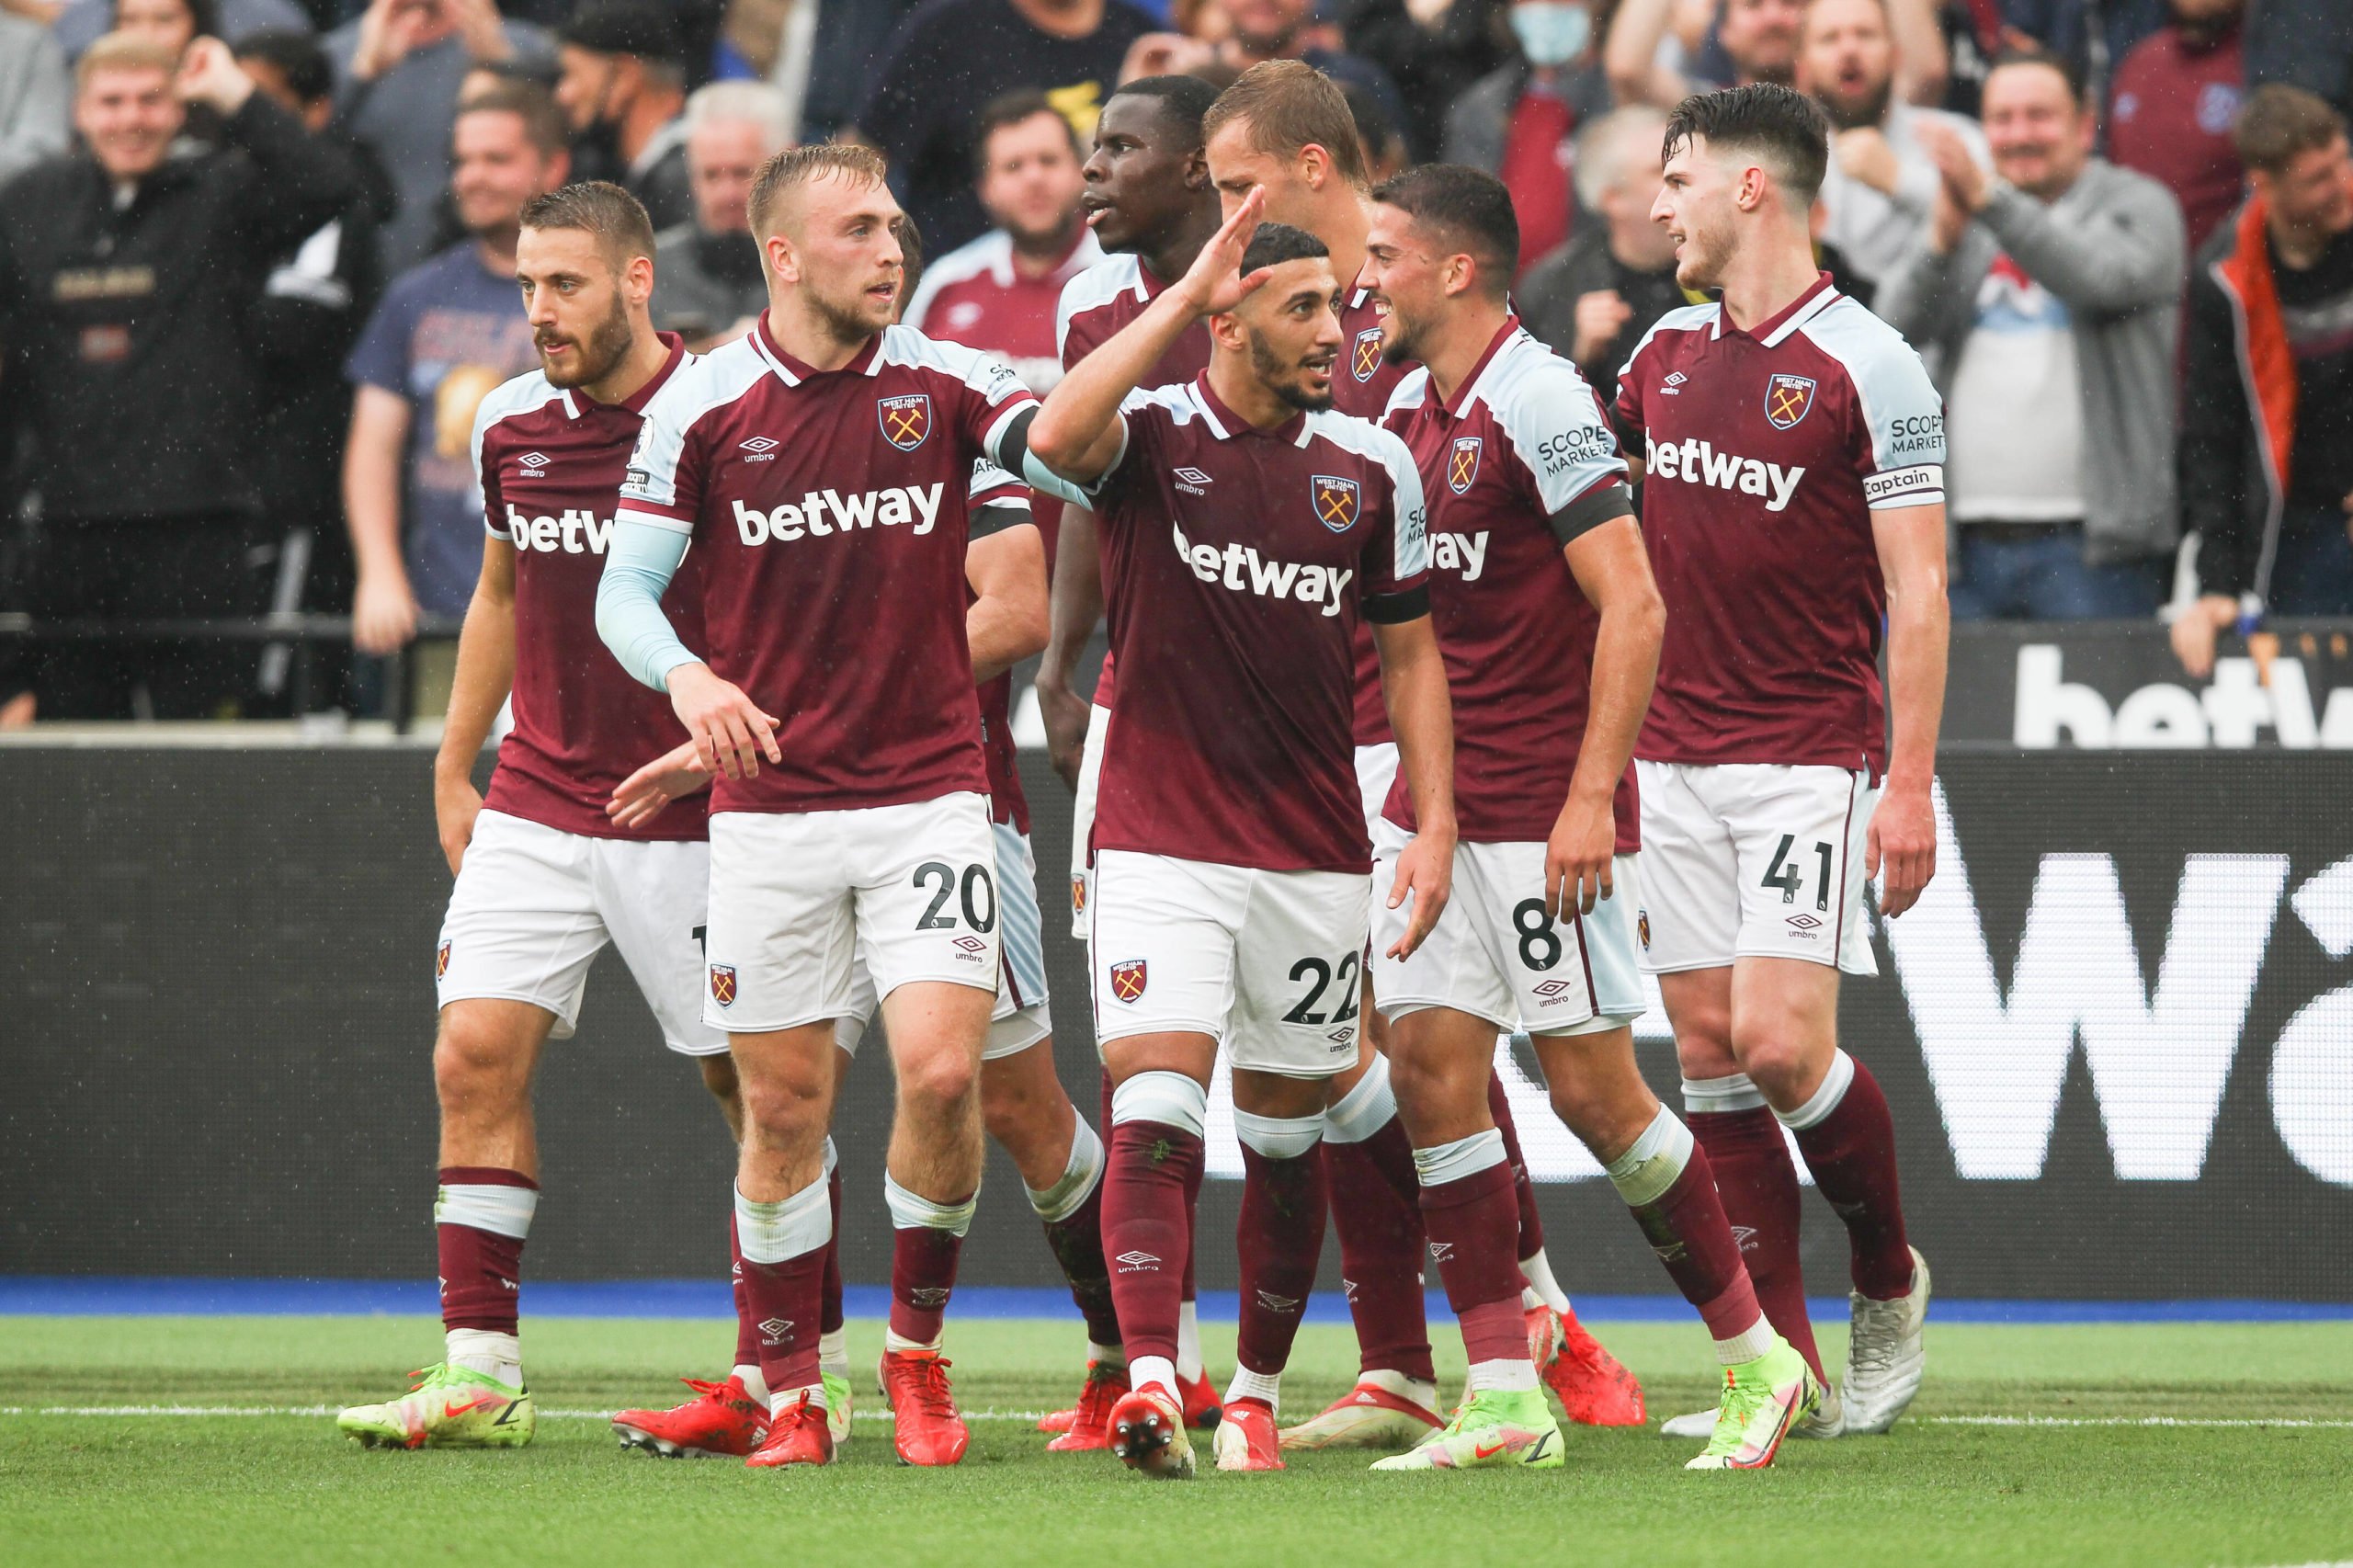 4-2-3-1 West Ham United Predicted Lineup Vs Brentford (West Ham players are seen in the picture)